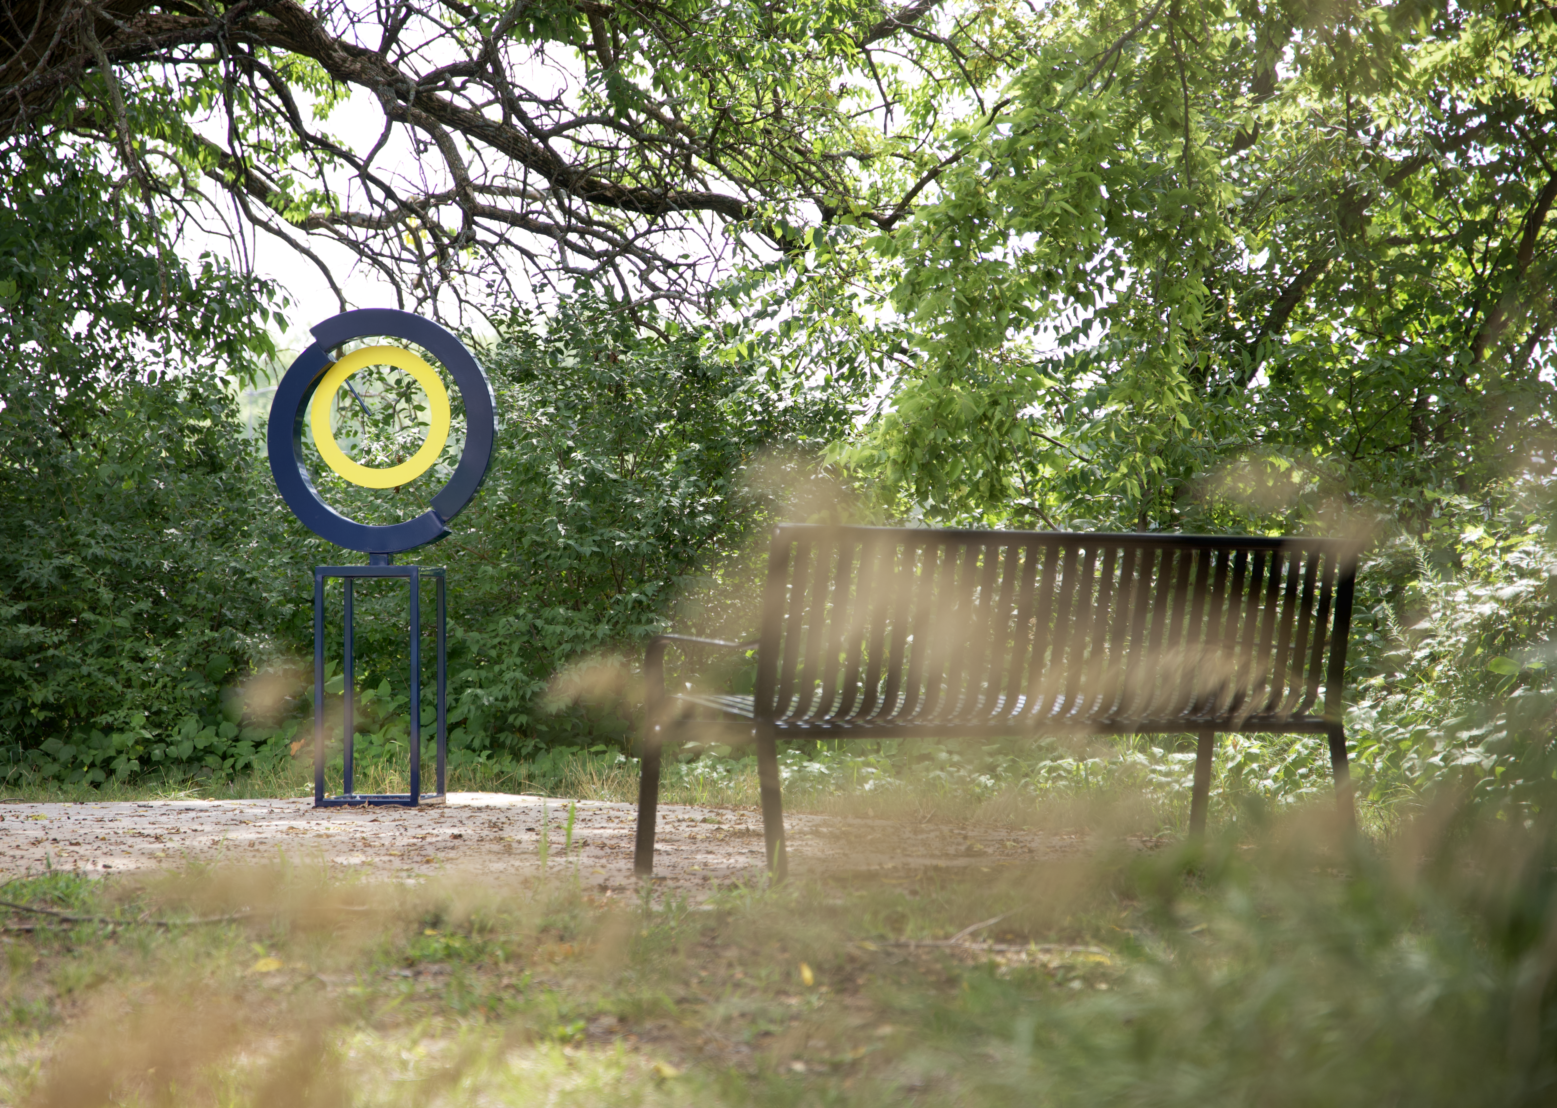 A circular sculpture with blue and yellow is shown.